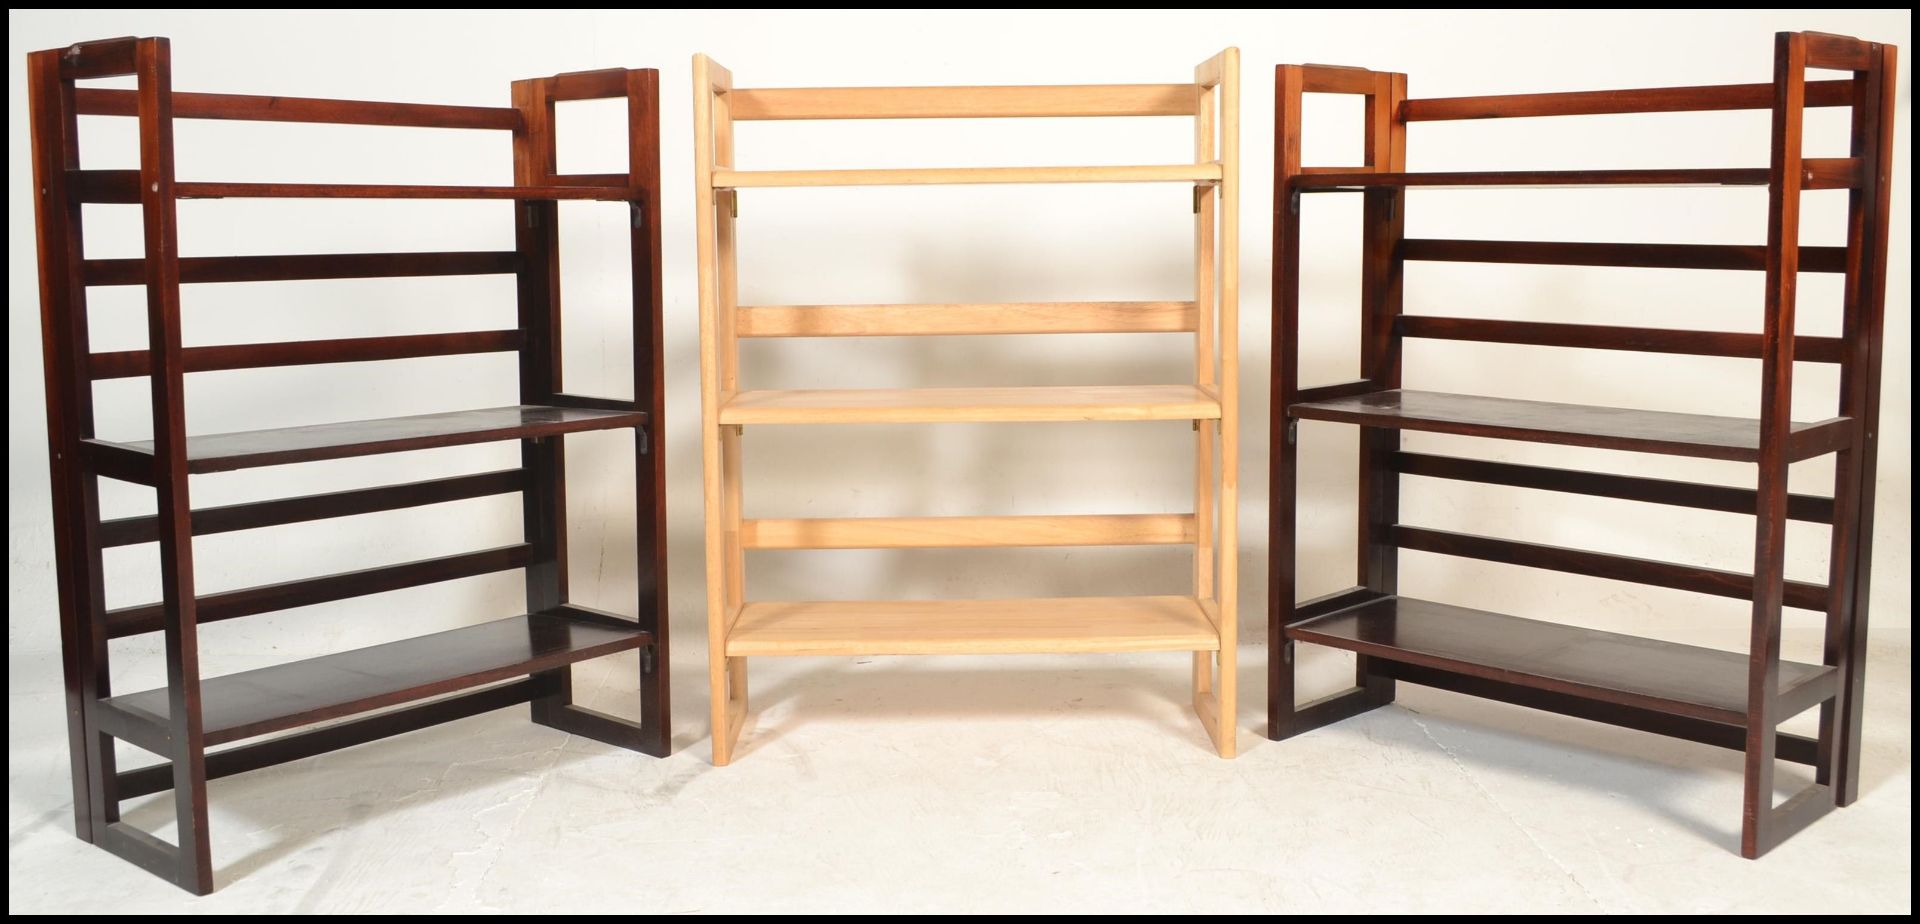 A pair of vintage style 20th Century wooden folding metamorphic bookcases / traders display shelves.